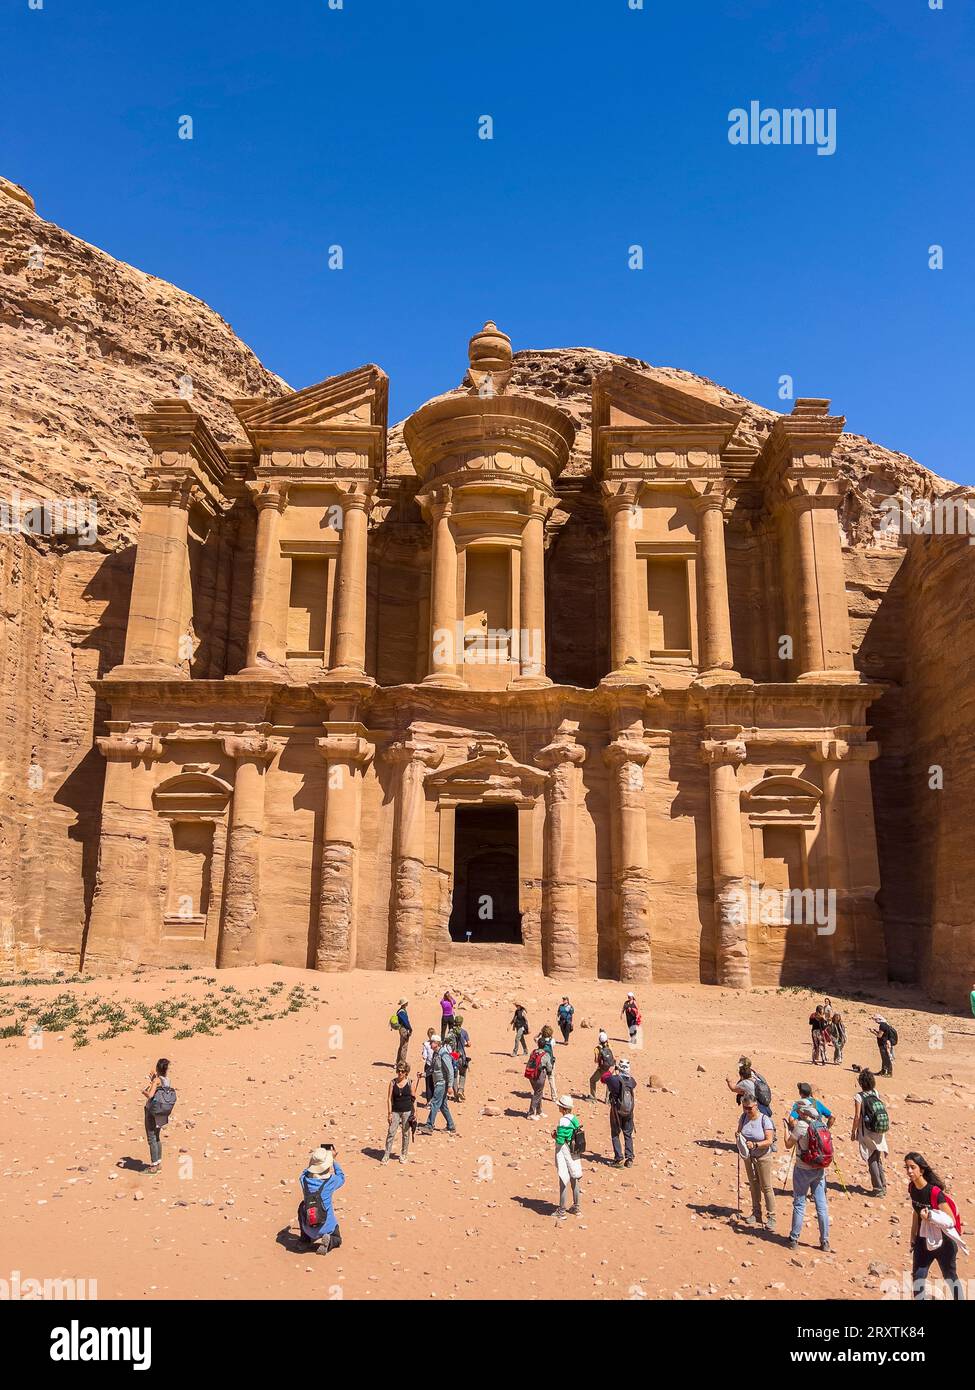 The Petra Monastery (Al Dayr), Petra Archaeological Park, UNESCO World Heritage Site, one of the New Seven Wonders of the World, Petra, Jordan Stock Photo